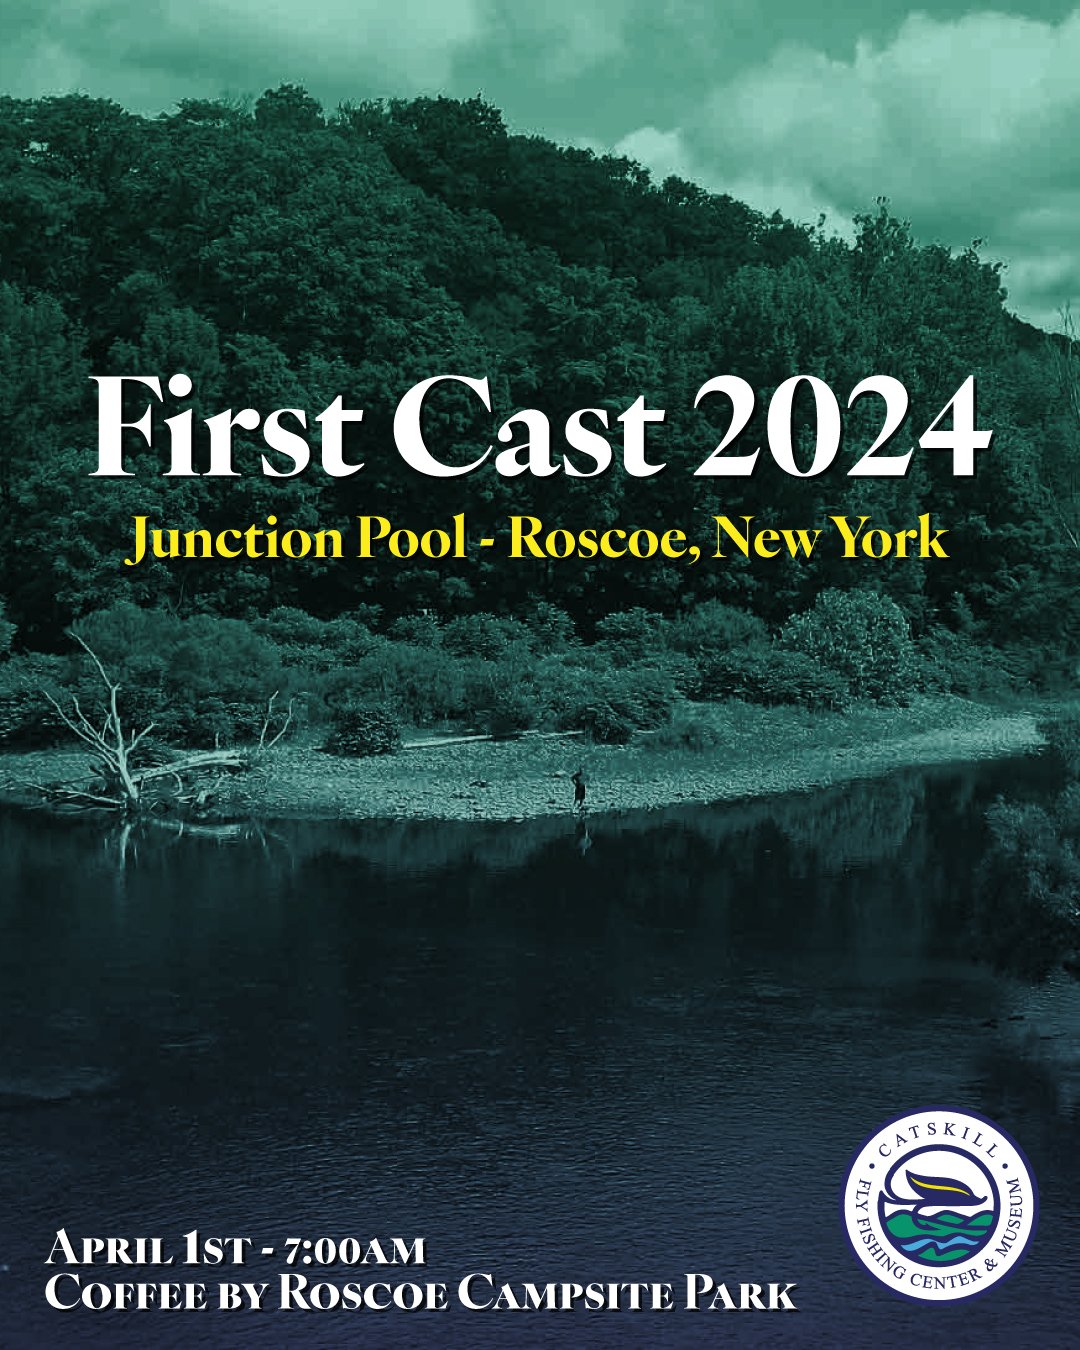 Next week - three ways to celebrate the new season with us...

First up - FIRST CAST! Join CFFCM, The Roscoe Chamber of Commerce, and our whole community as we celebrate the old tradition of the ceremonial first cast at Junction Pool. This year owner